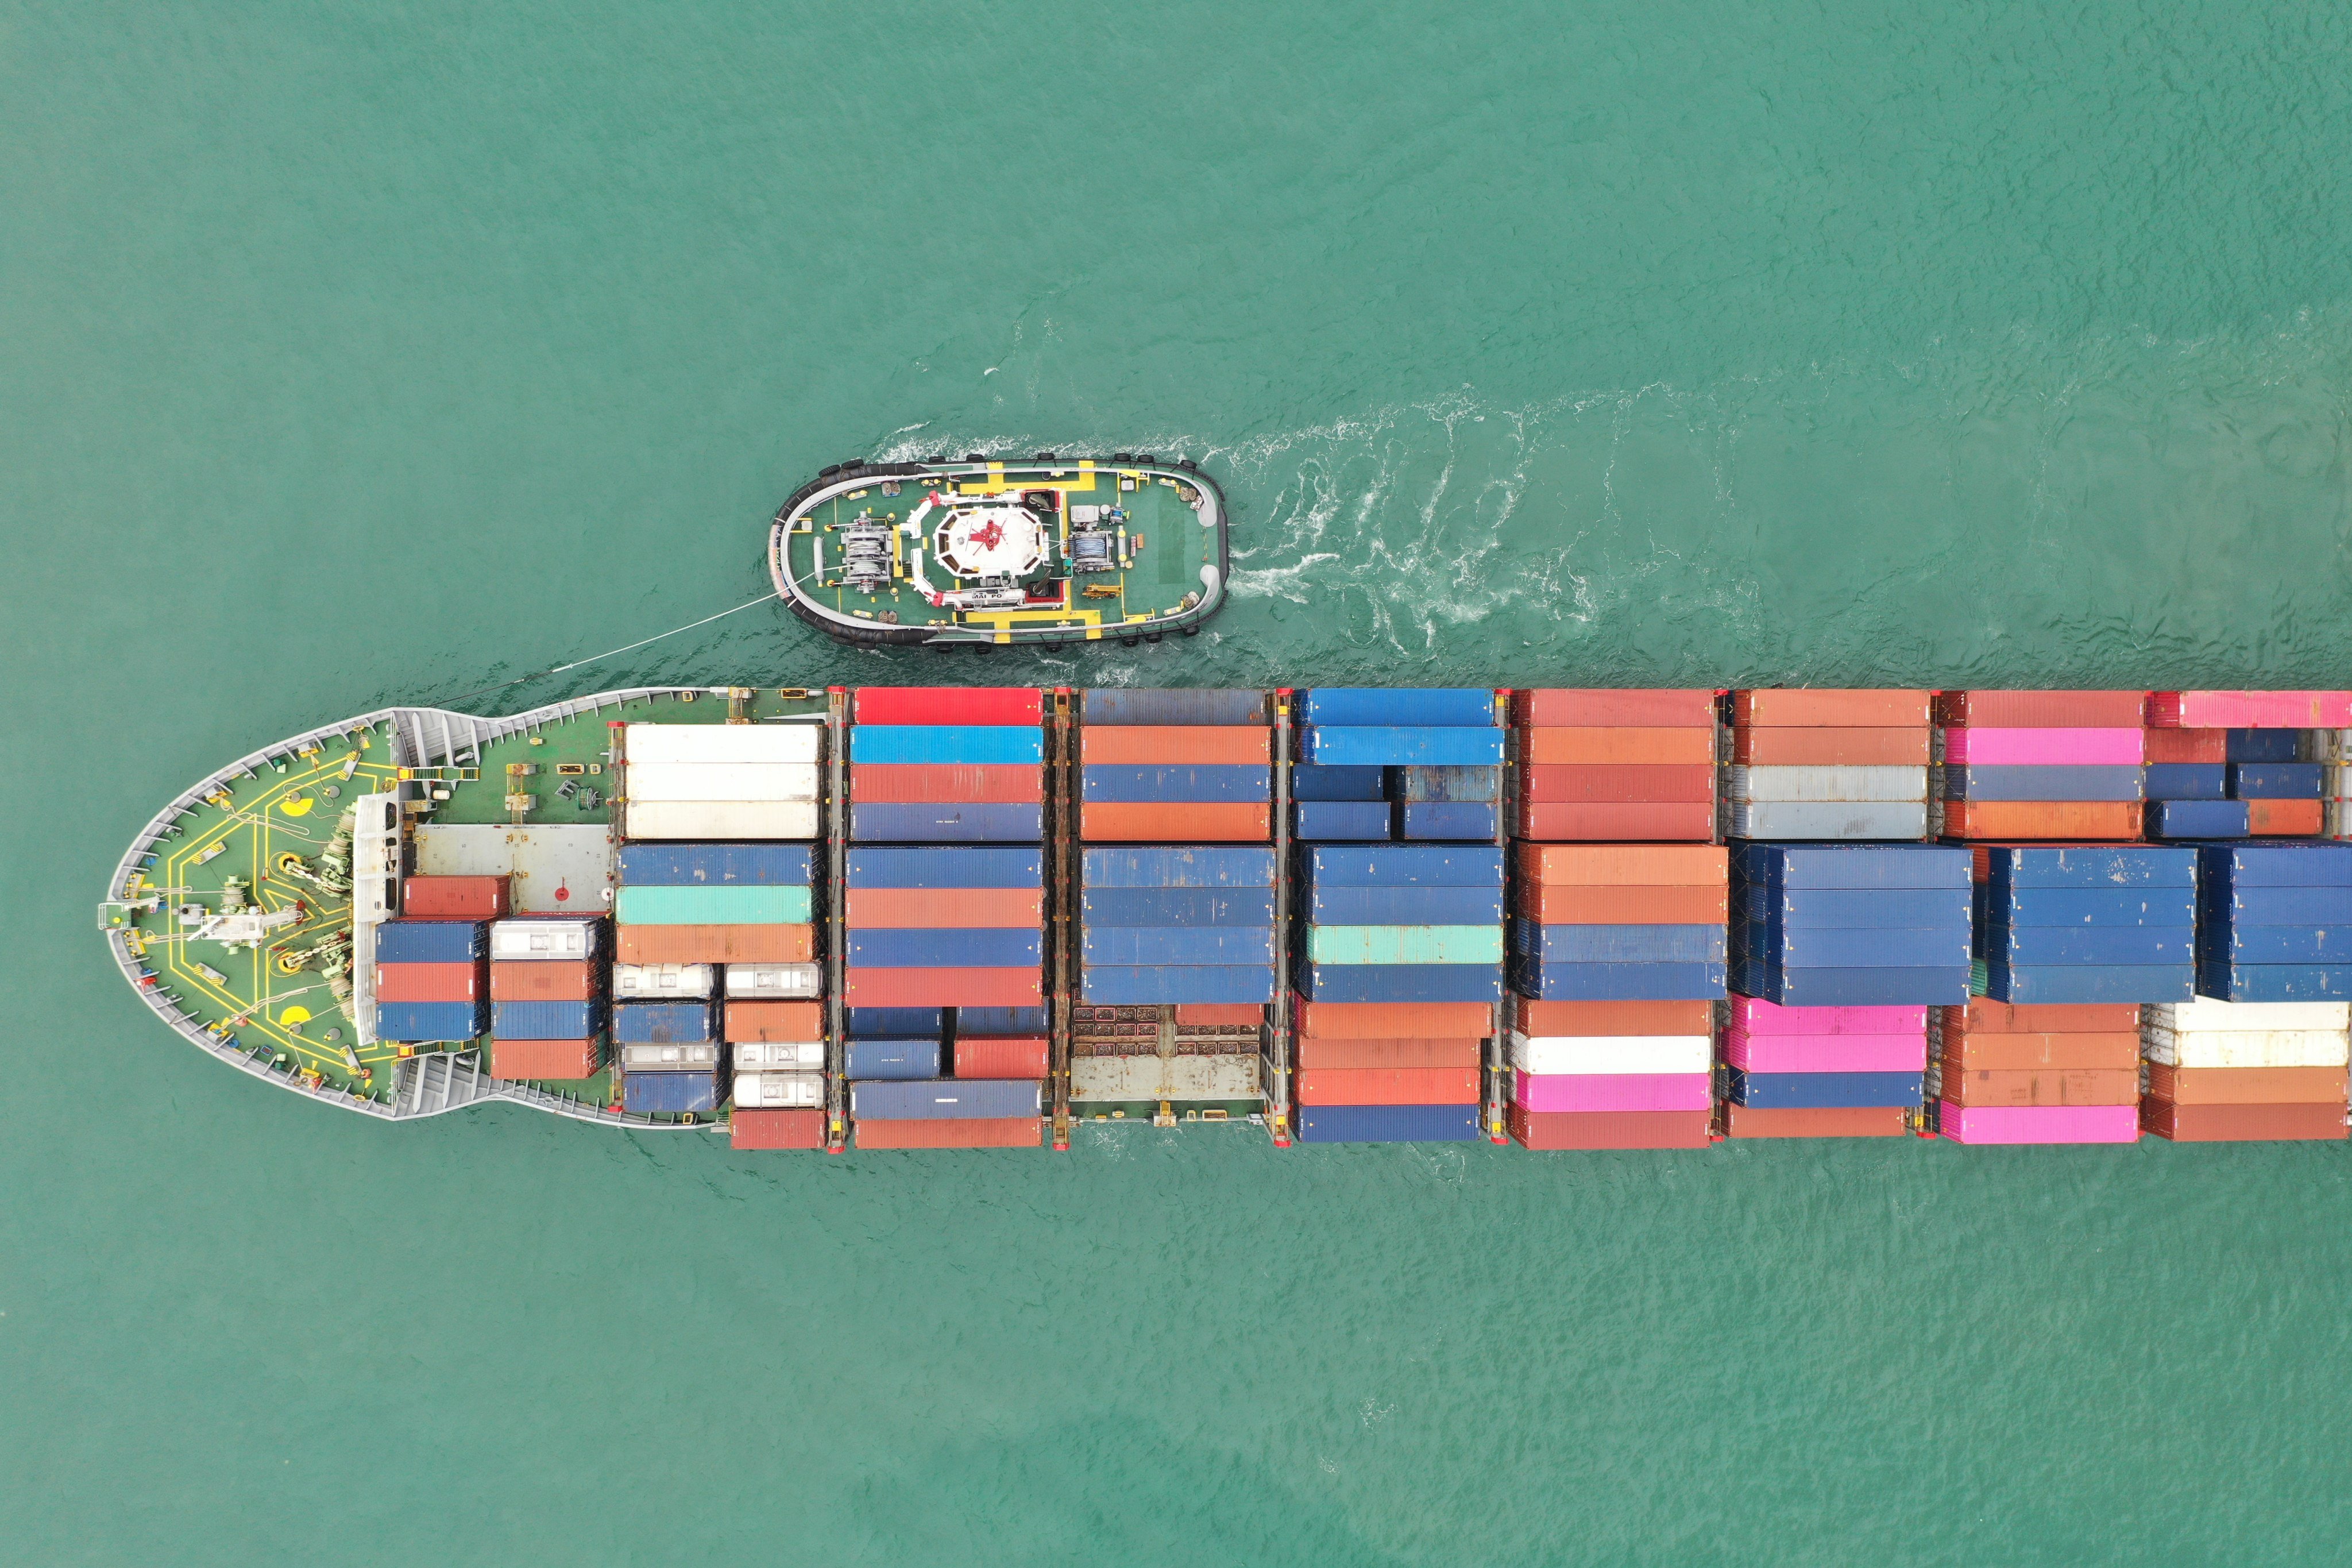 View of cargo ships and containers at the Hong Kong Container Terminal, Kwai Chung. Photo: Winson Wong